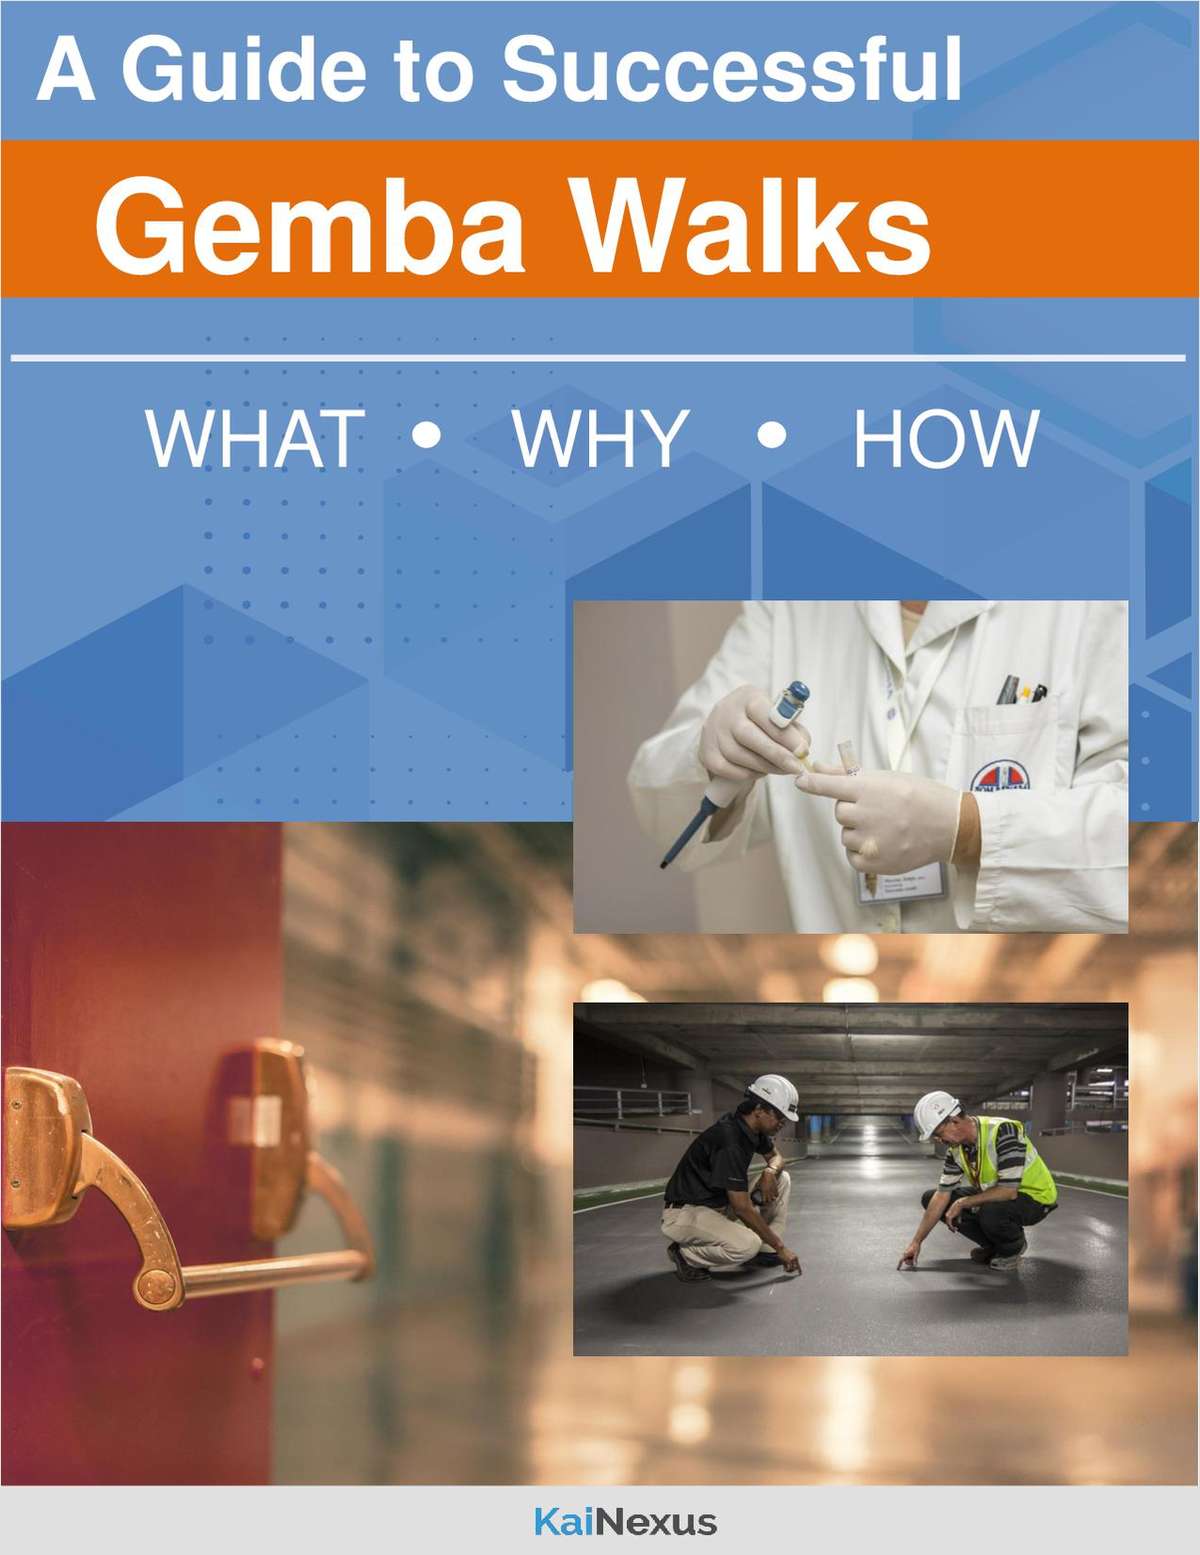 A Guide to Successful Gemba Walks